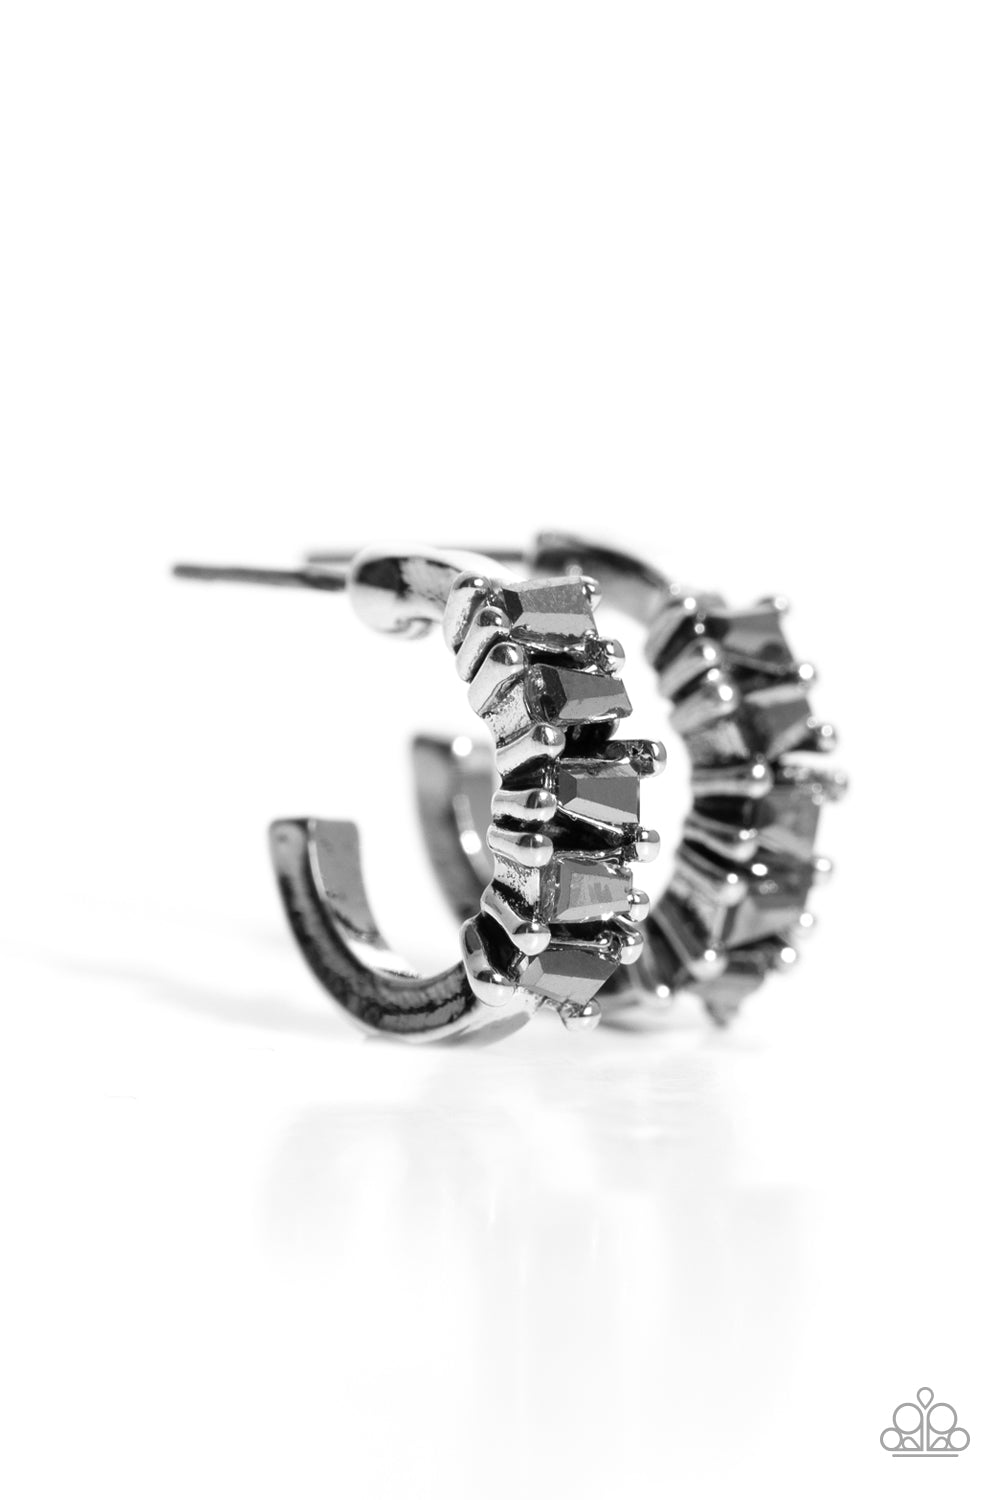 Rugged Rockstar Silver Hoop Earrings - Paparazzi Accessories- lightbox - CarasShop.com - $5 Jewelry by Cara Jewels